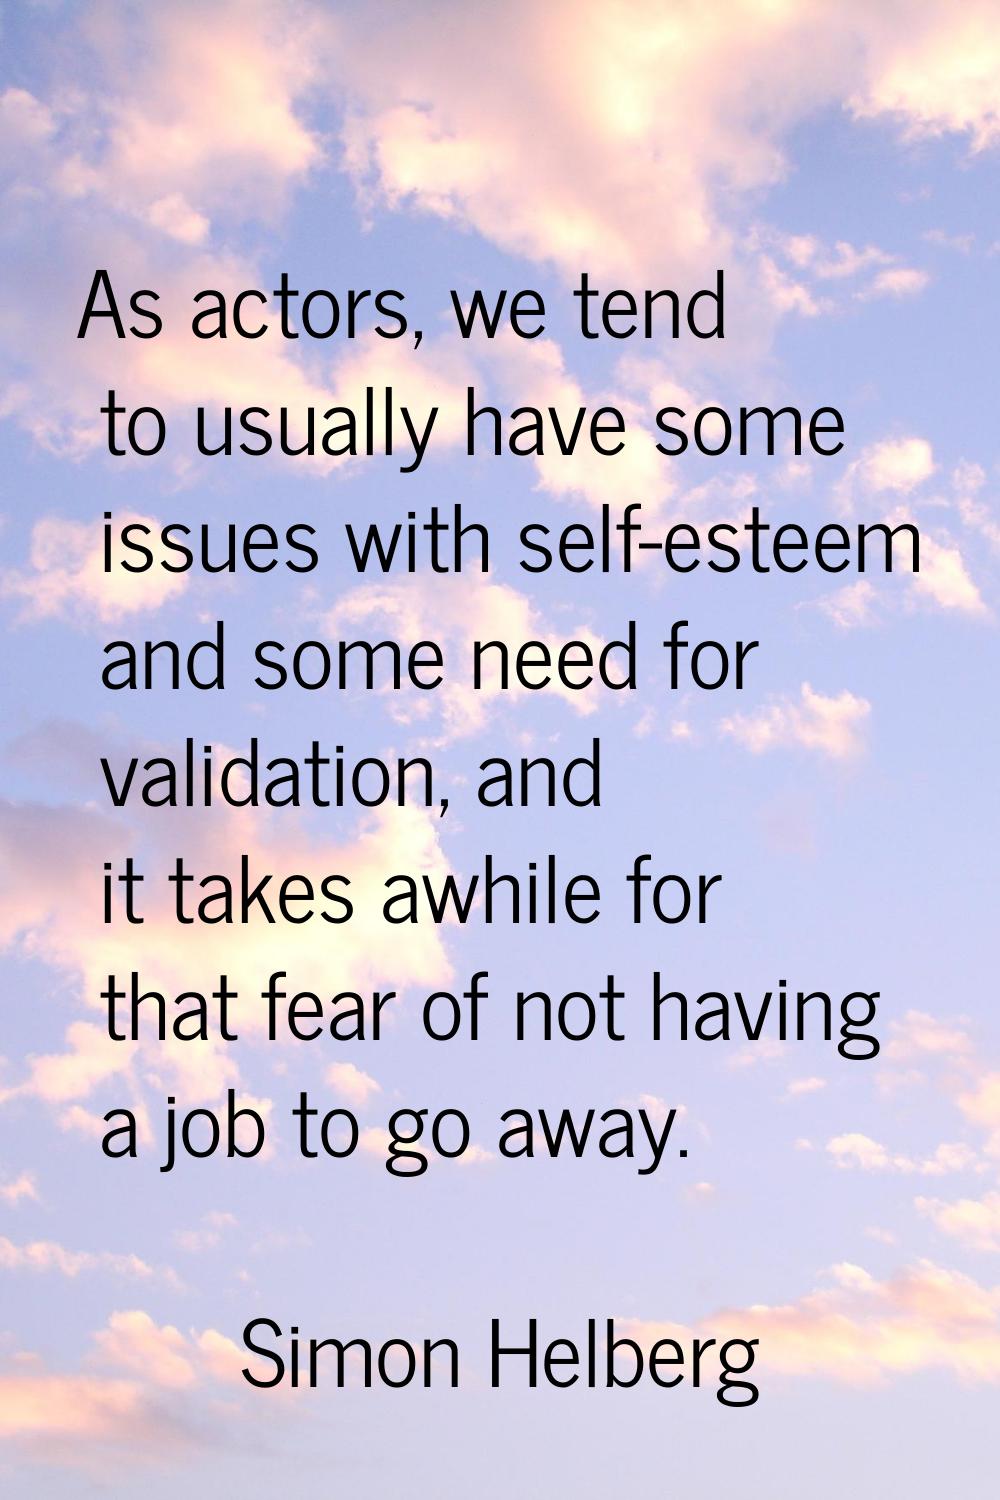 As actors, we tend to usually have some issues with self-esteem and some need for validation, and i